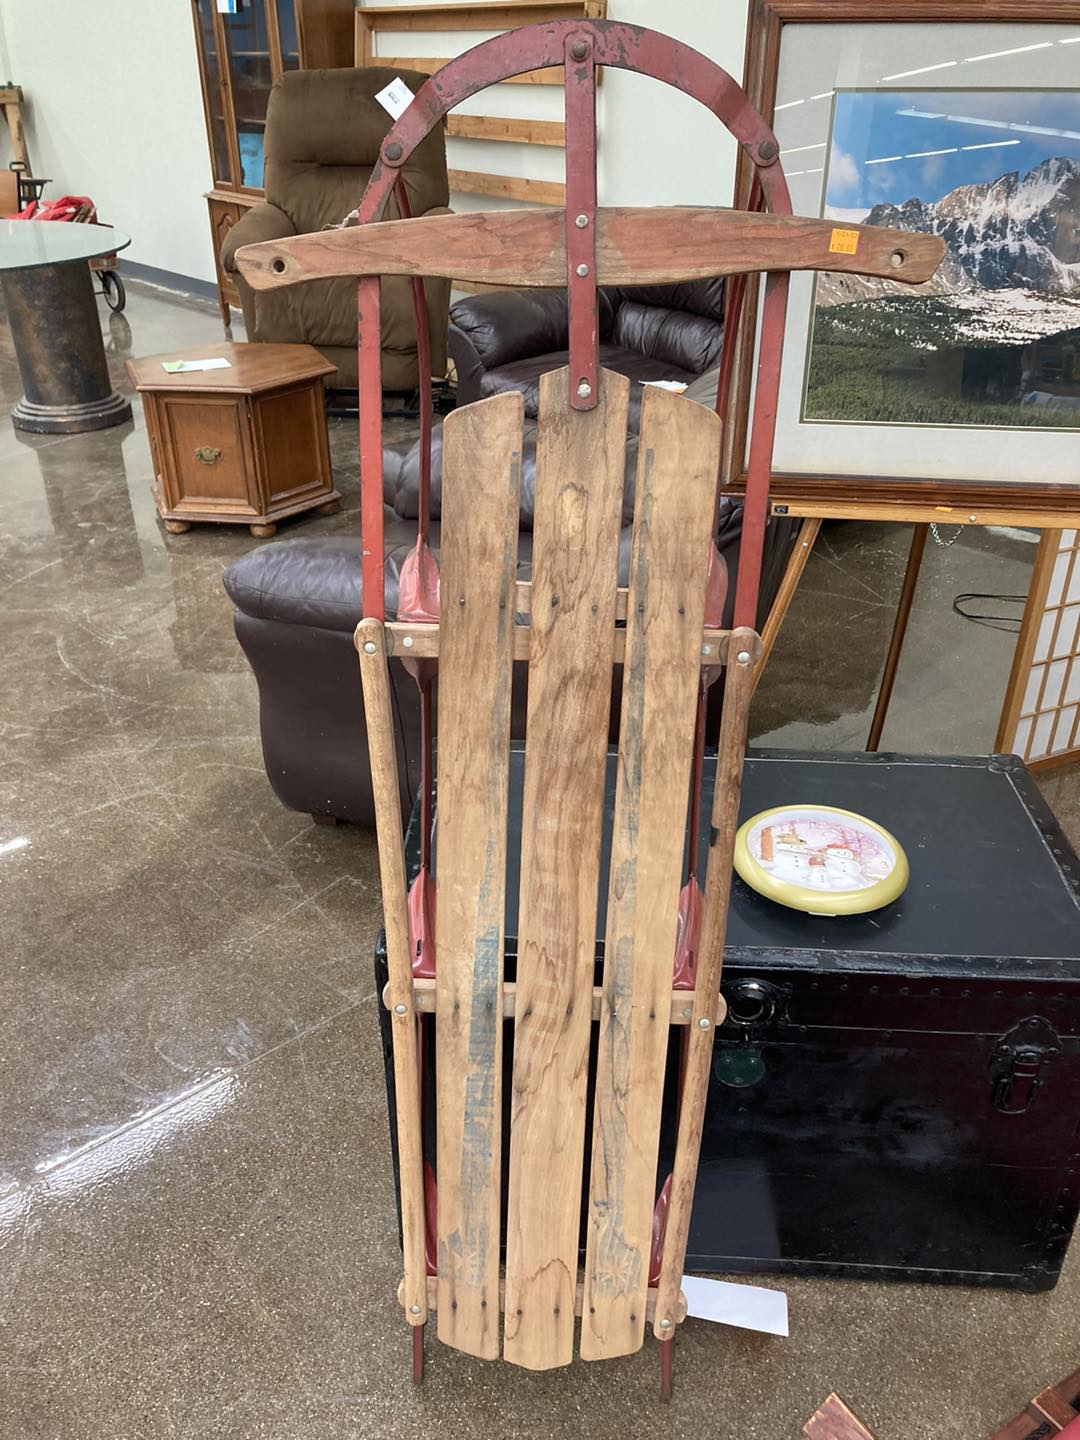 An old school wooden toboggan with red metal runners is propped up on a black trunk.